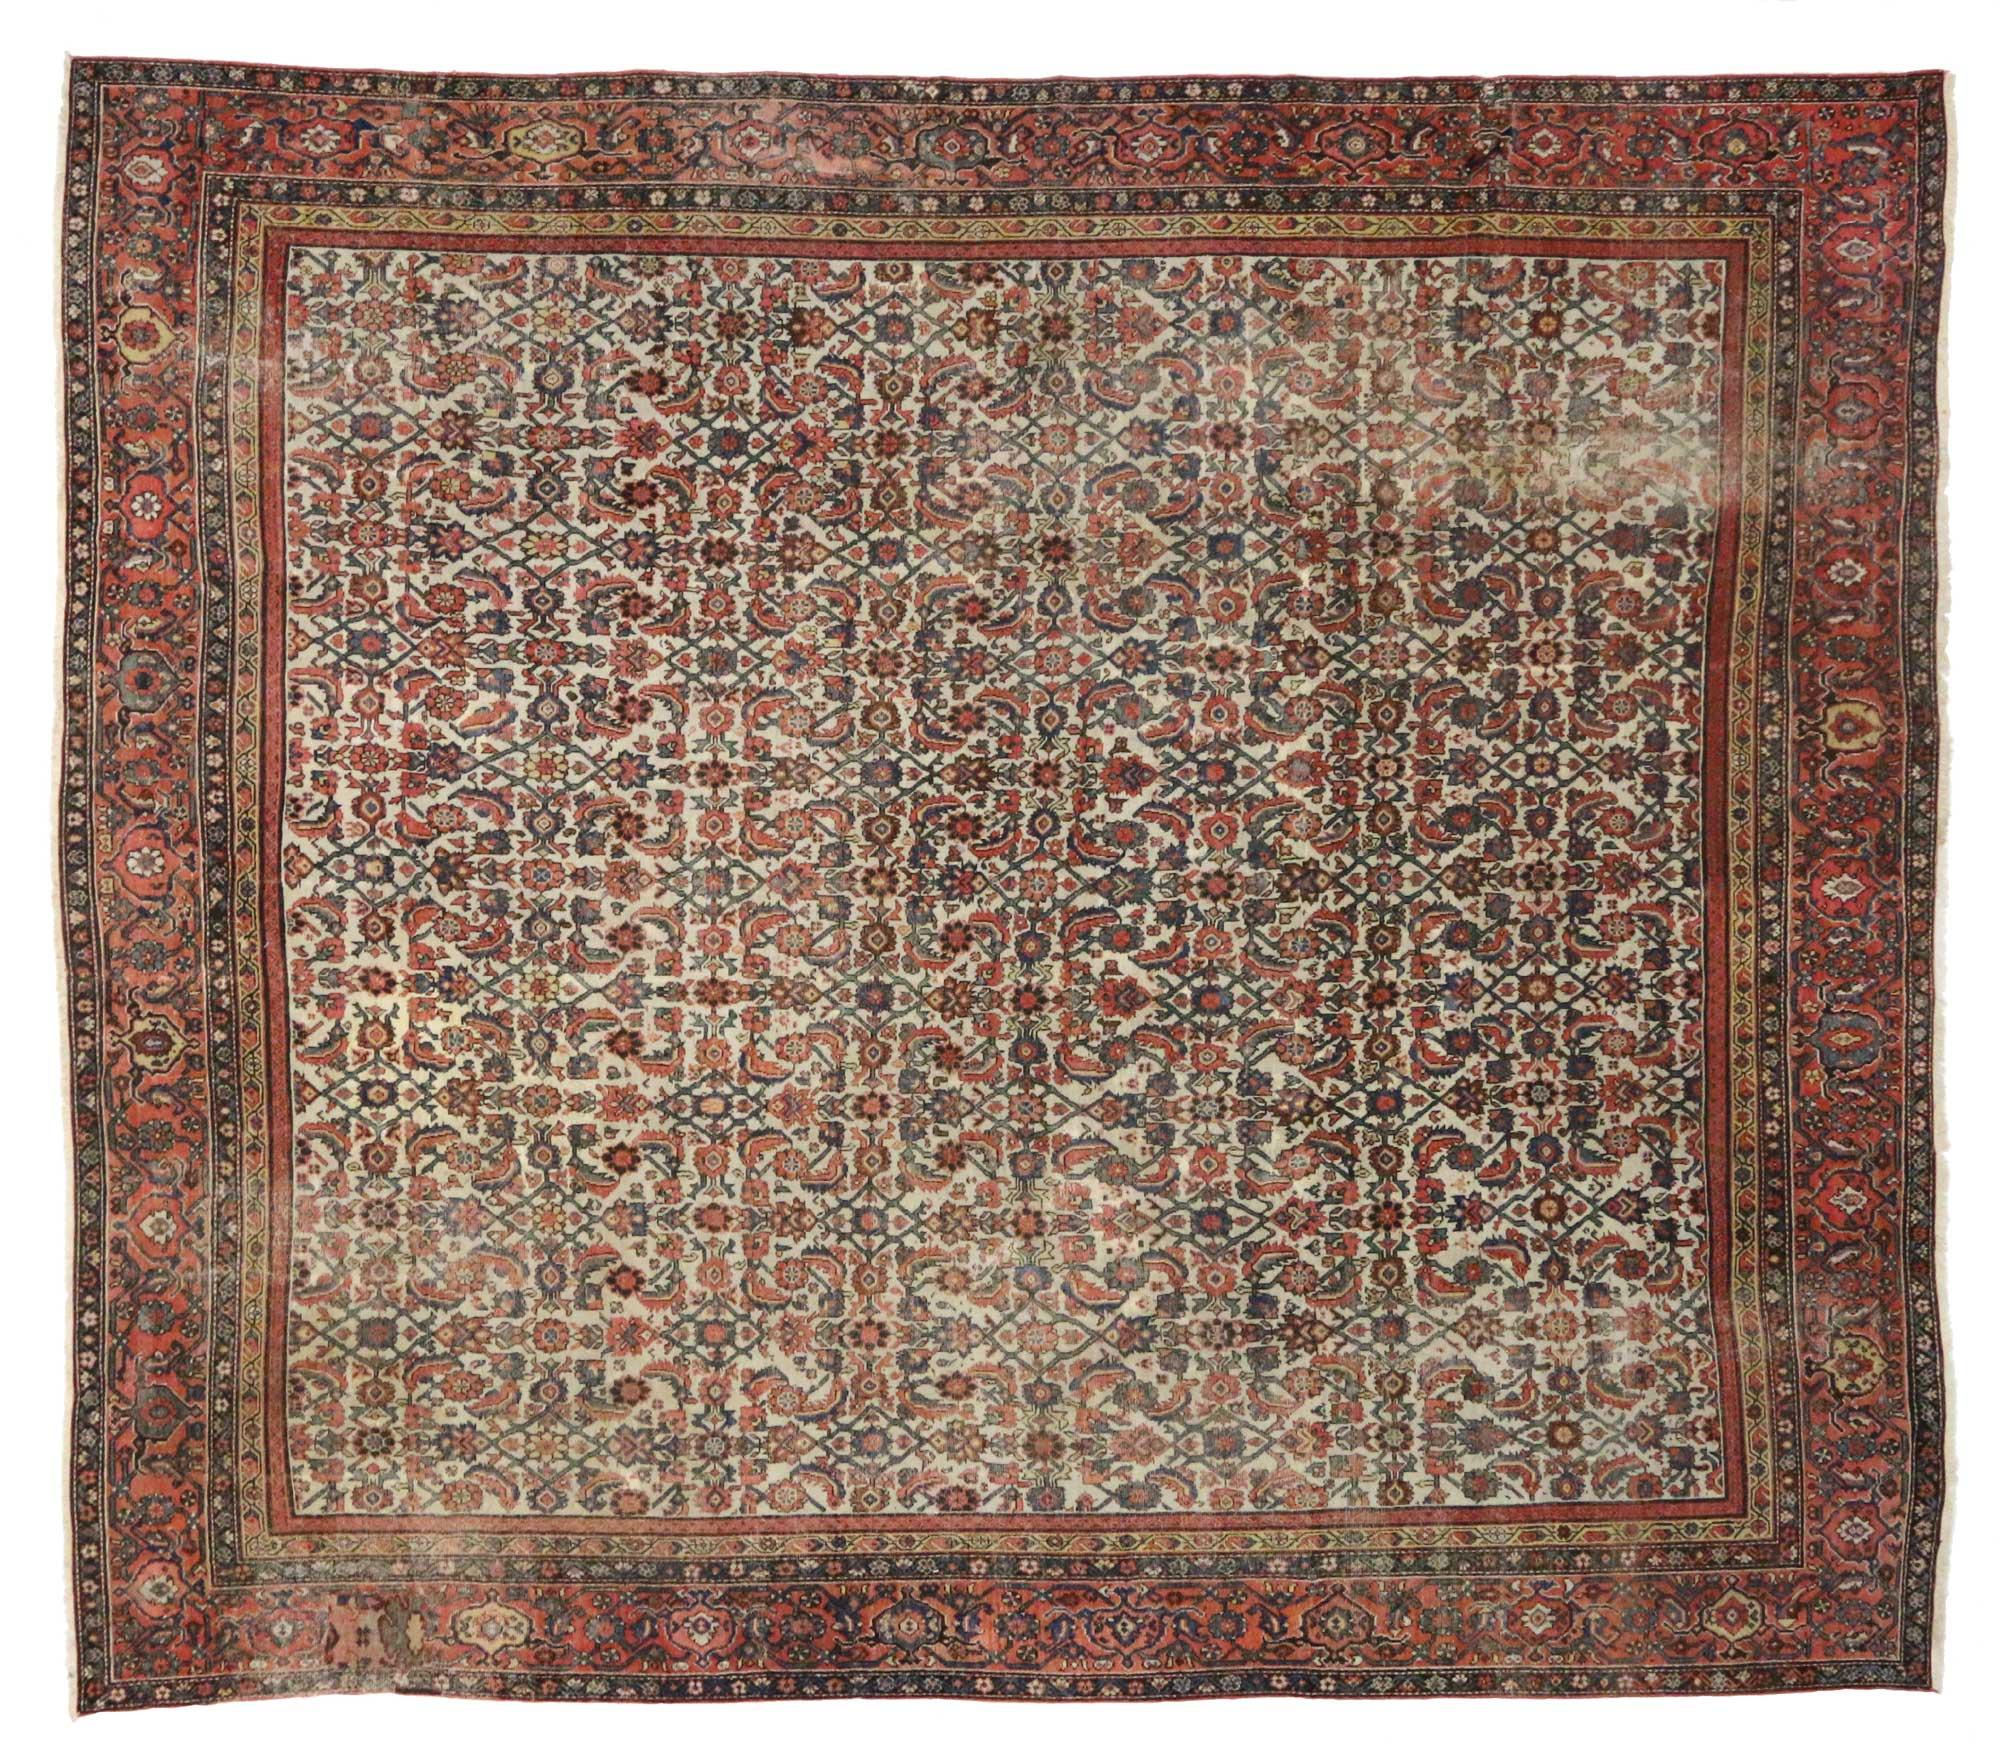 Late 19th Century Distressed Antique Persian Mahal Rug with Rustic English Style In Distressed Condition For Sale In Dallas, TX